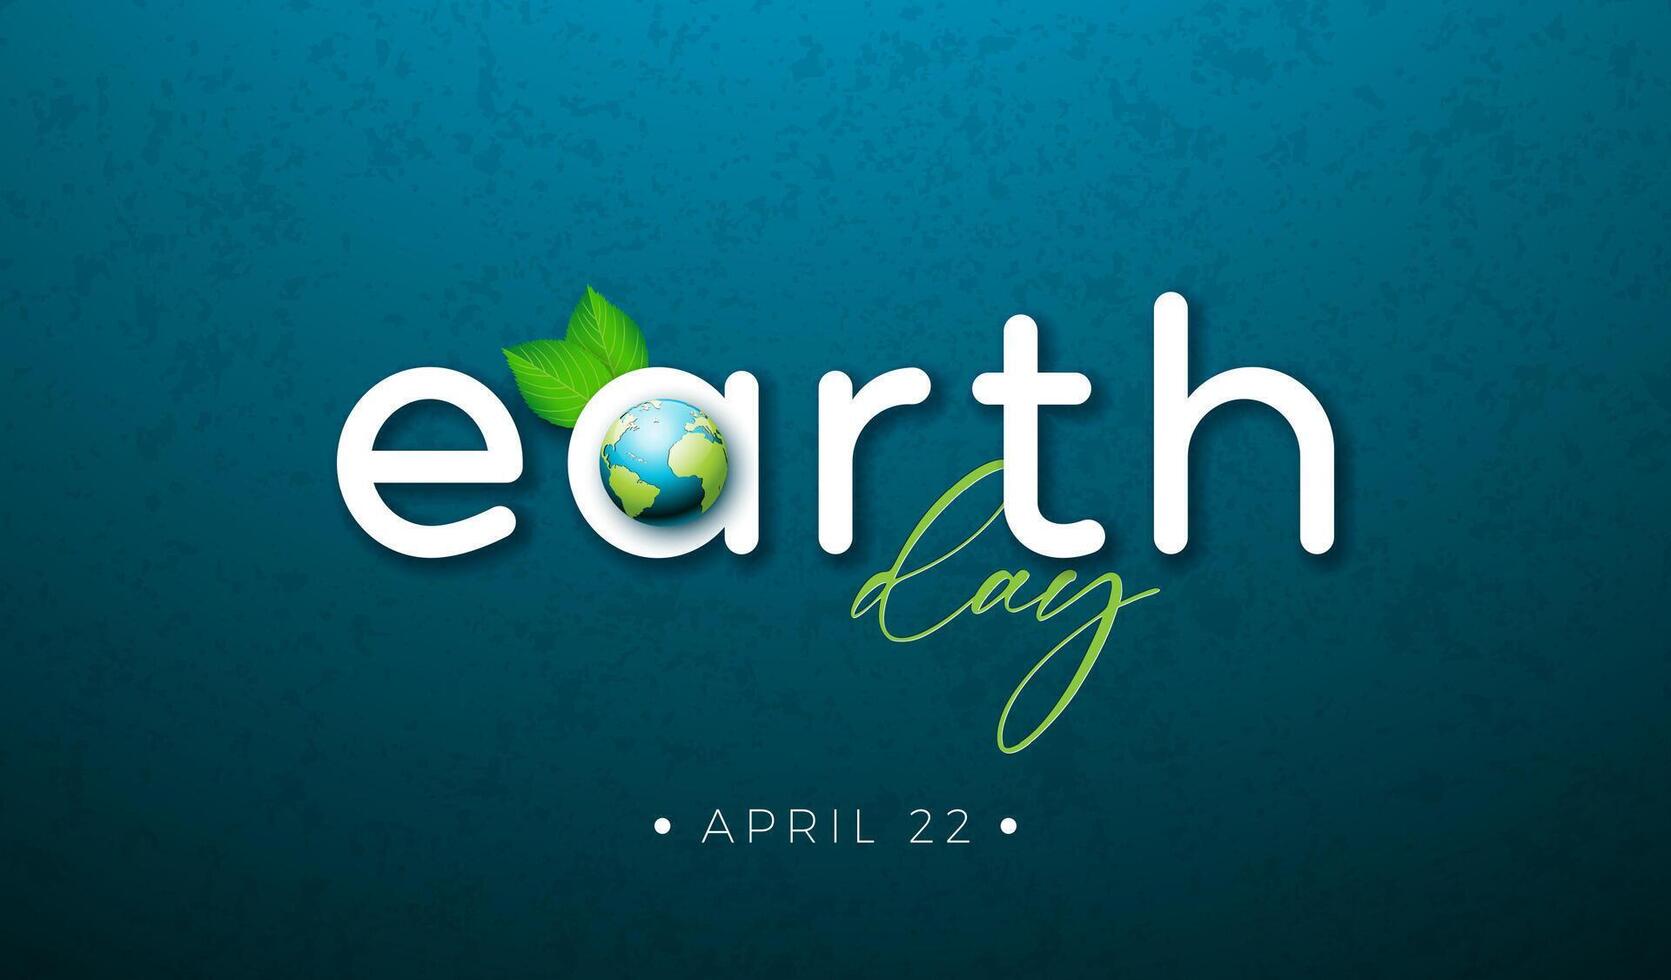 Happy Earth Day Illustration with Planet and Green Leaves on Blue Background. World Map on April 22 Environmental and Eco Concept with Typography Lettering. Vector Design for Postcard, Greeting Card